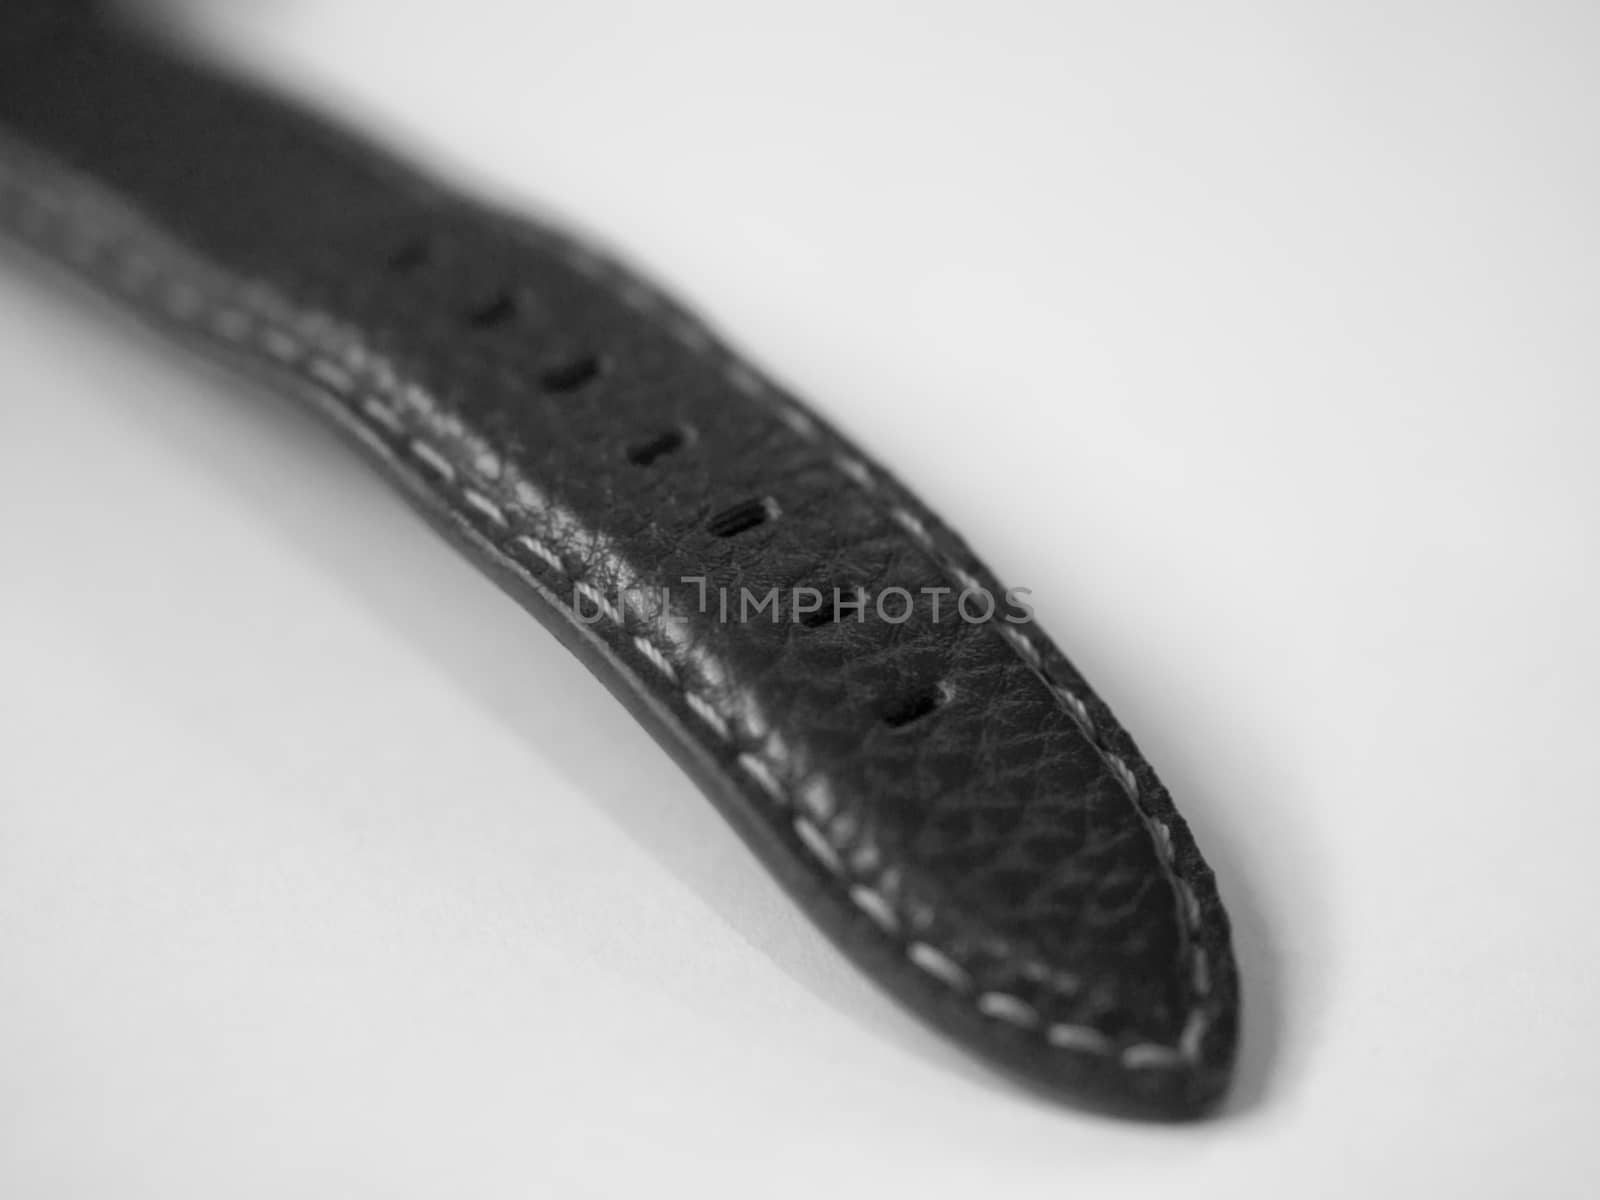 LEATHER WATCH STRAP by PrettyTG